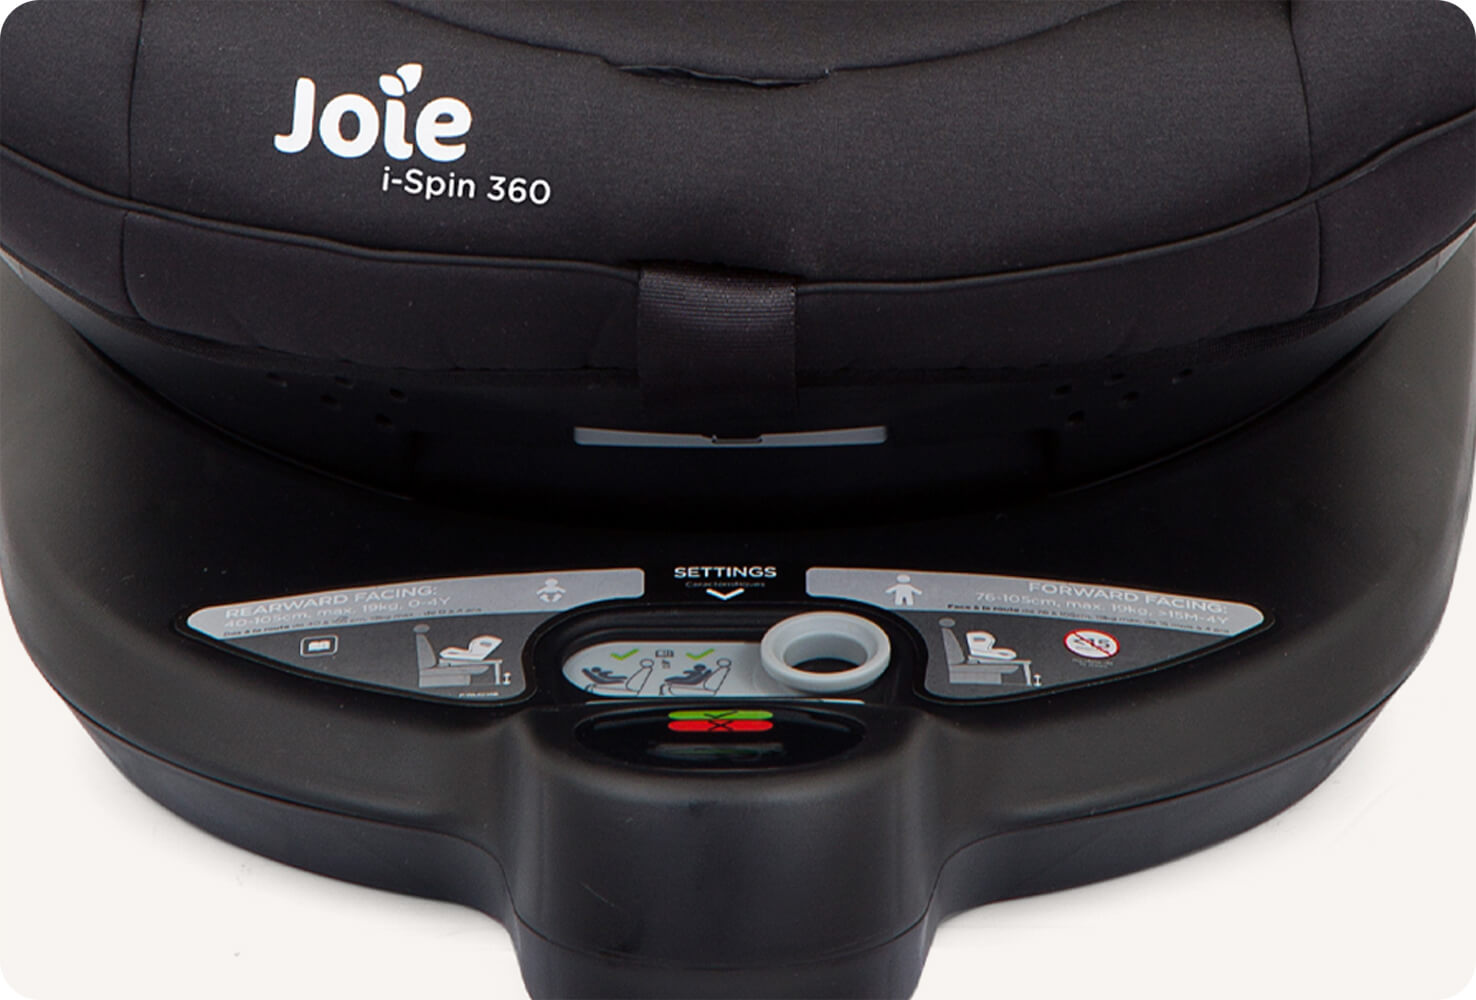  Closeup of the rearfacing lockoff button on the Joie I-Spin 360 car seat base.